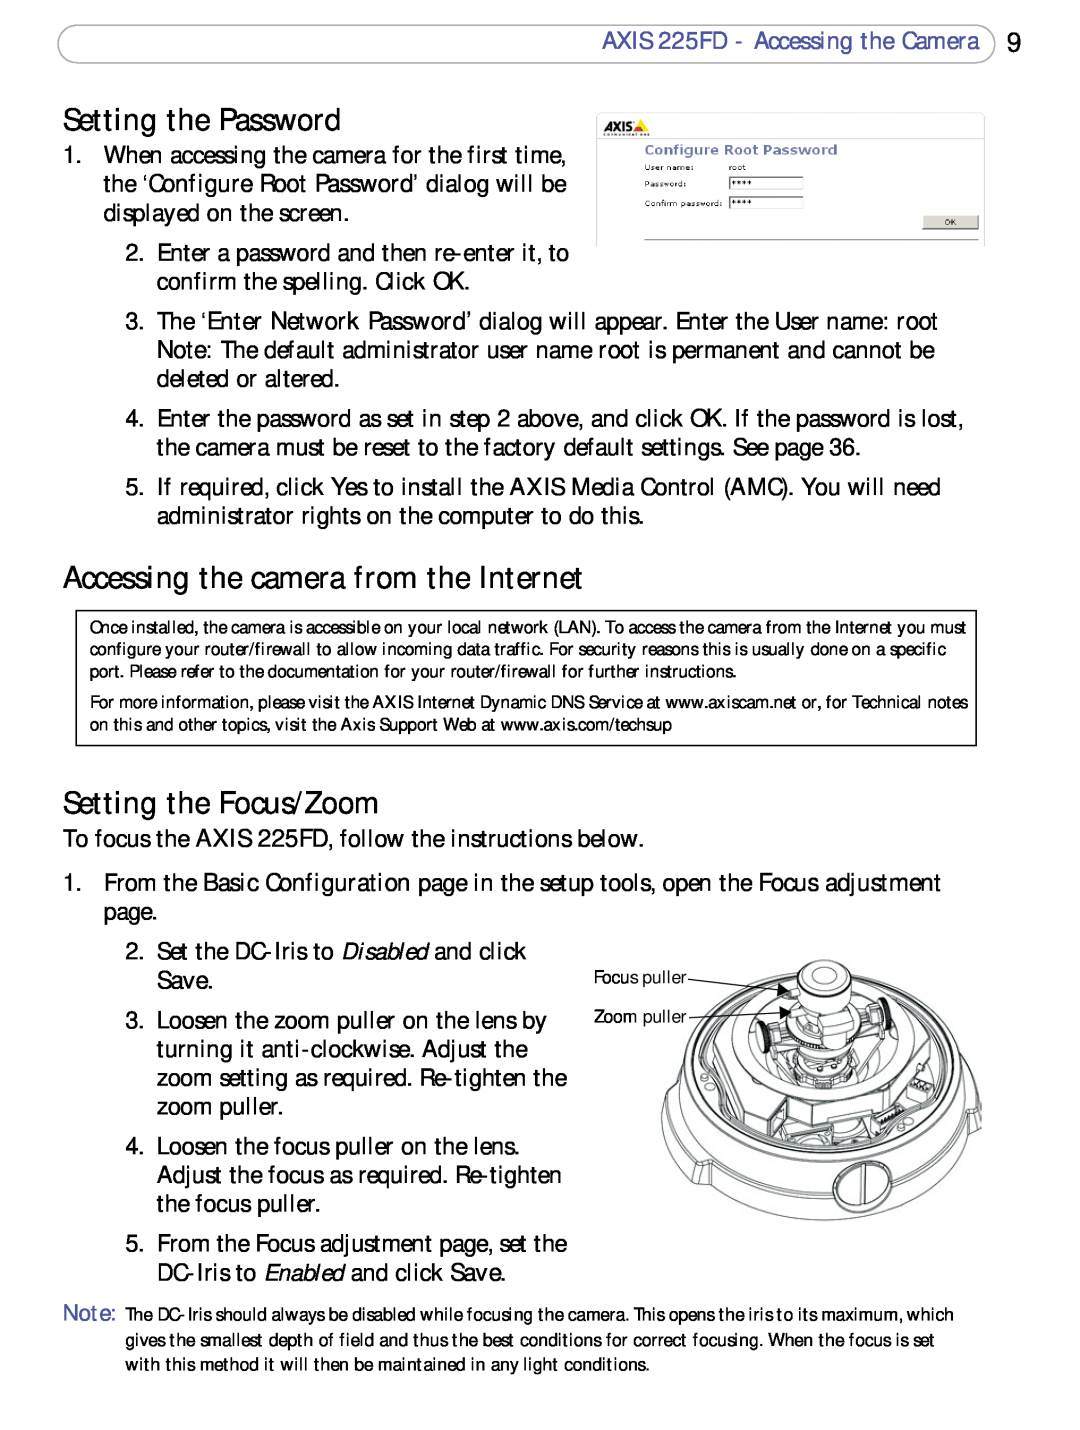 Axis Communications 225FD user manual Setting the Password, Accessing the camera from the Internet, Setting the Focus/Zoom 